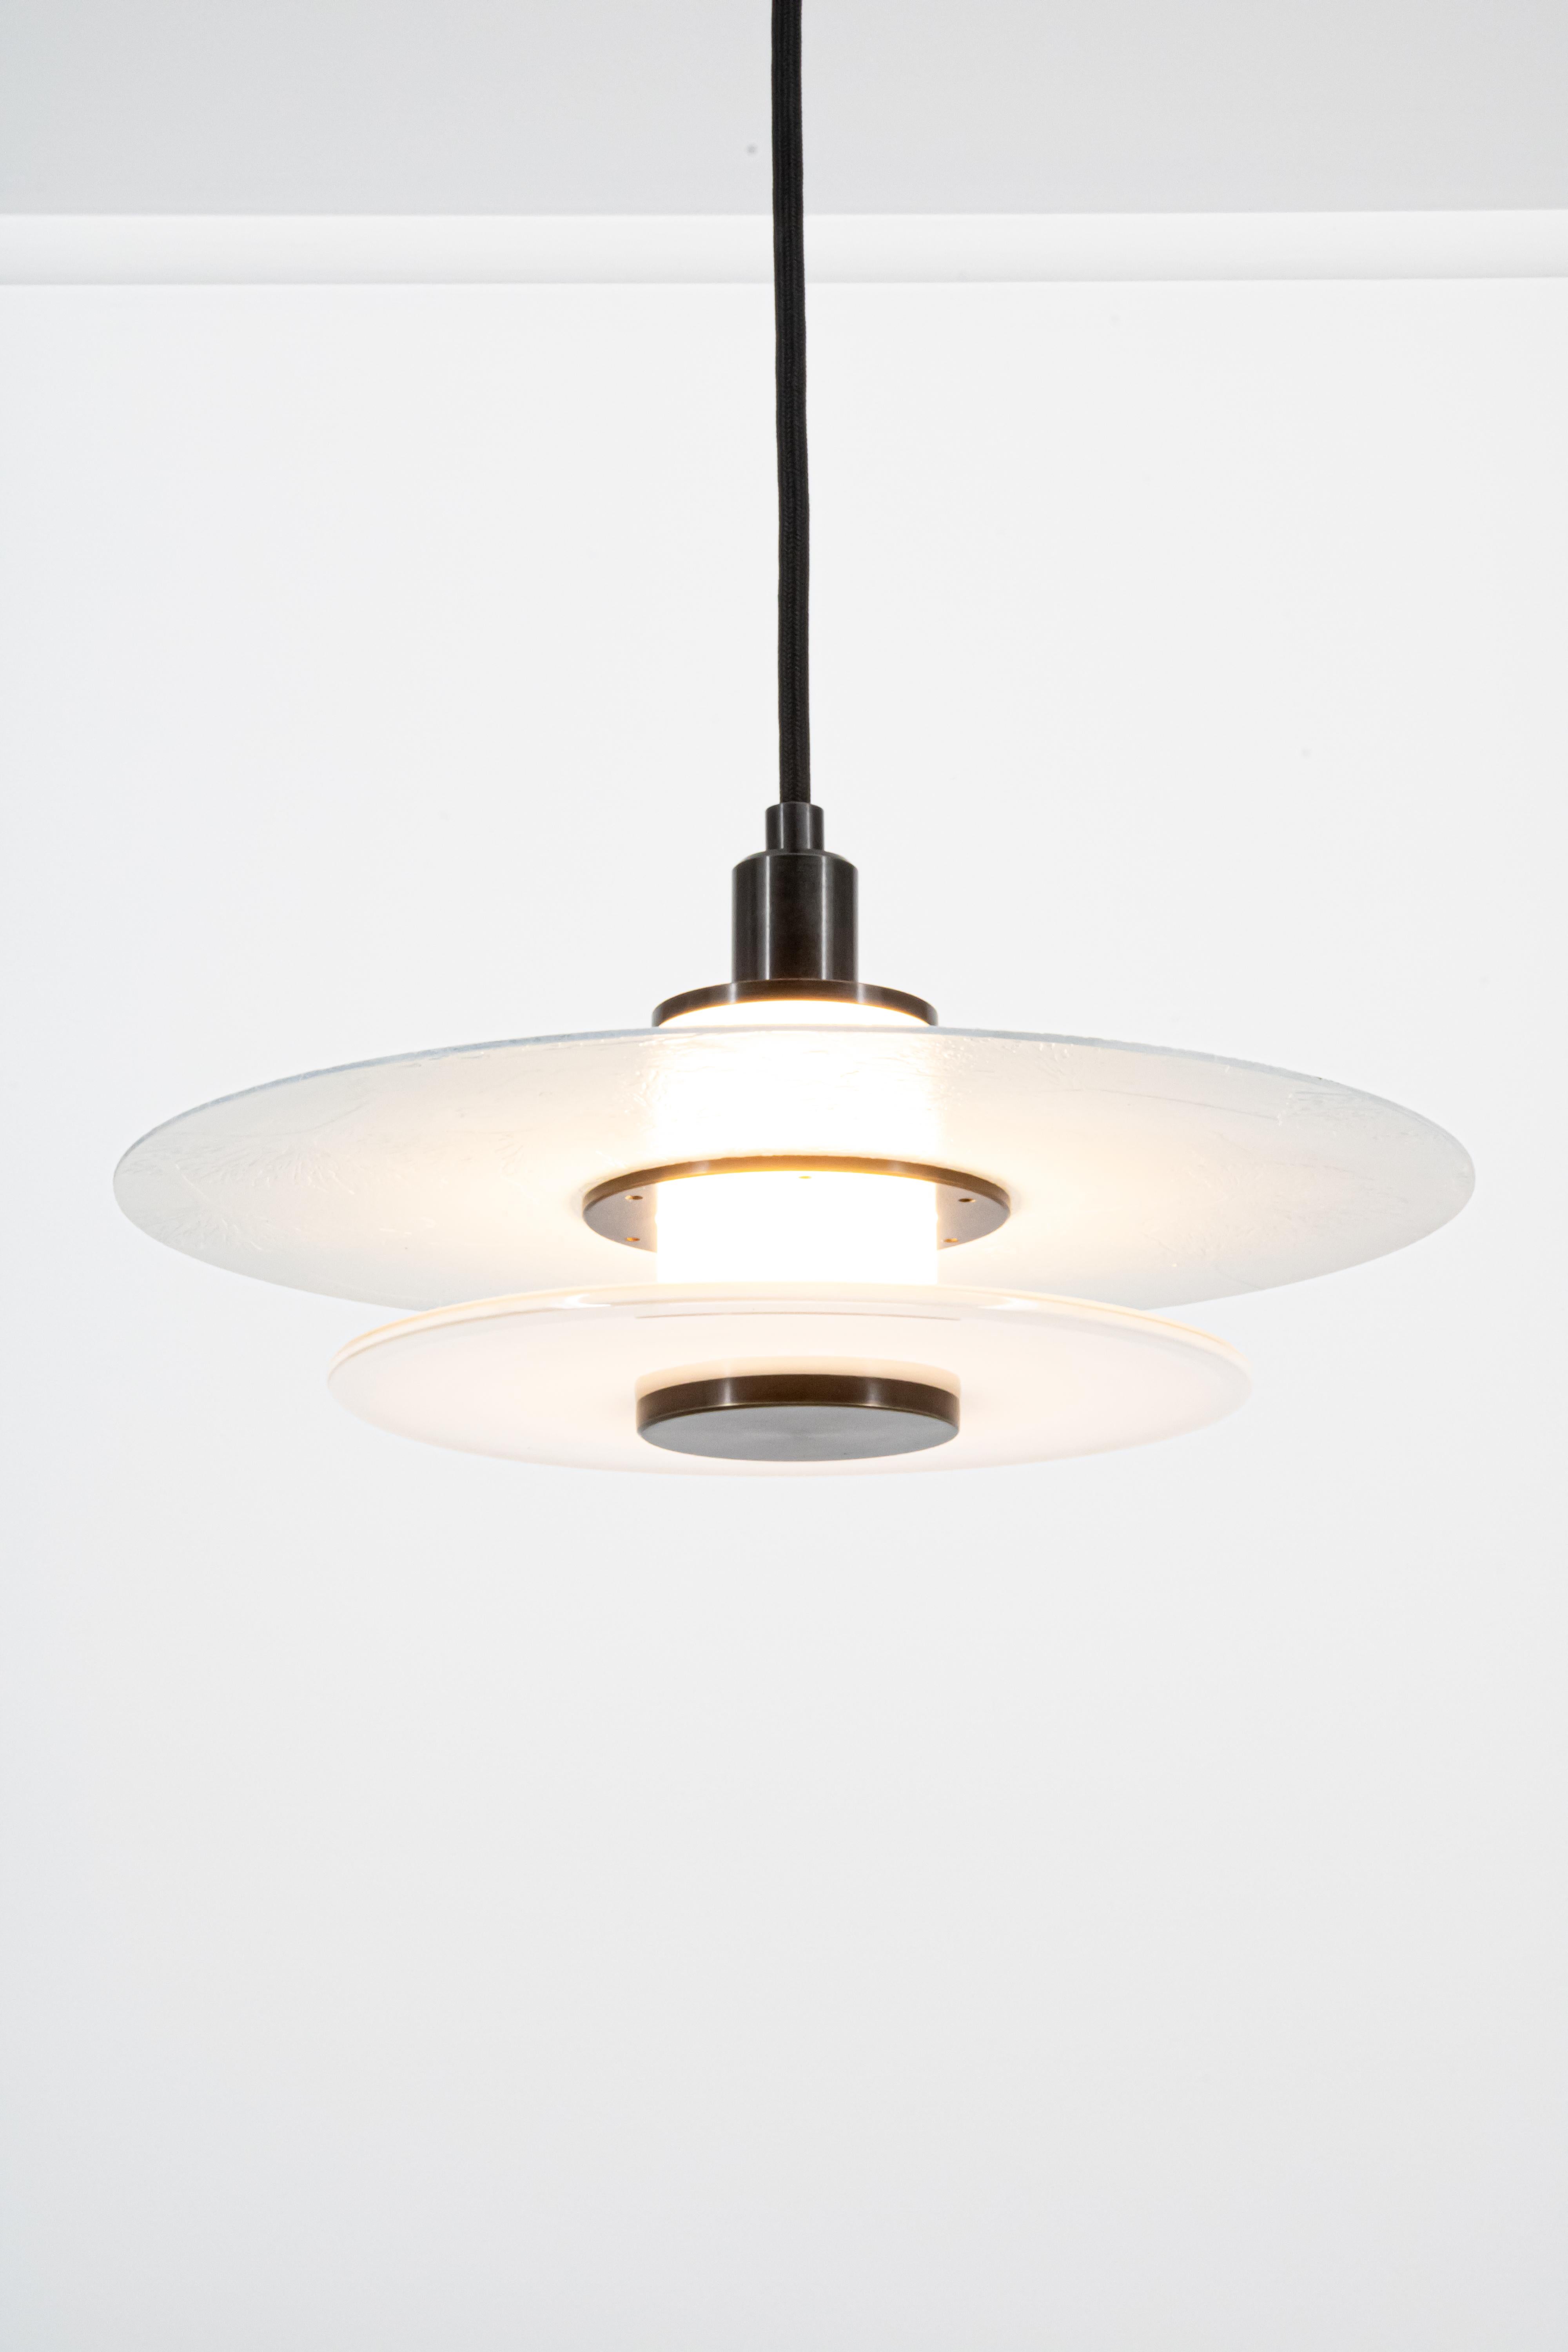 Klein Pendant w/ Milk Glass, Etched Ginkgo in Two Tone Blackened Brass For Sale 11